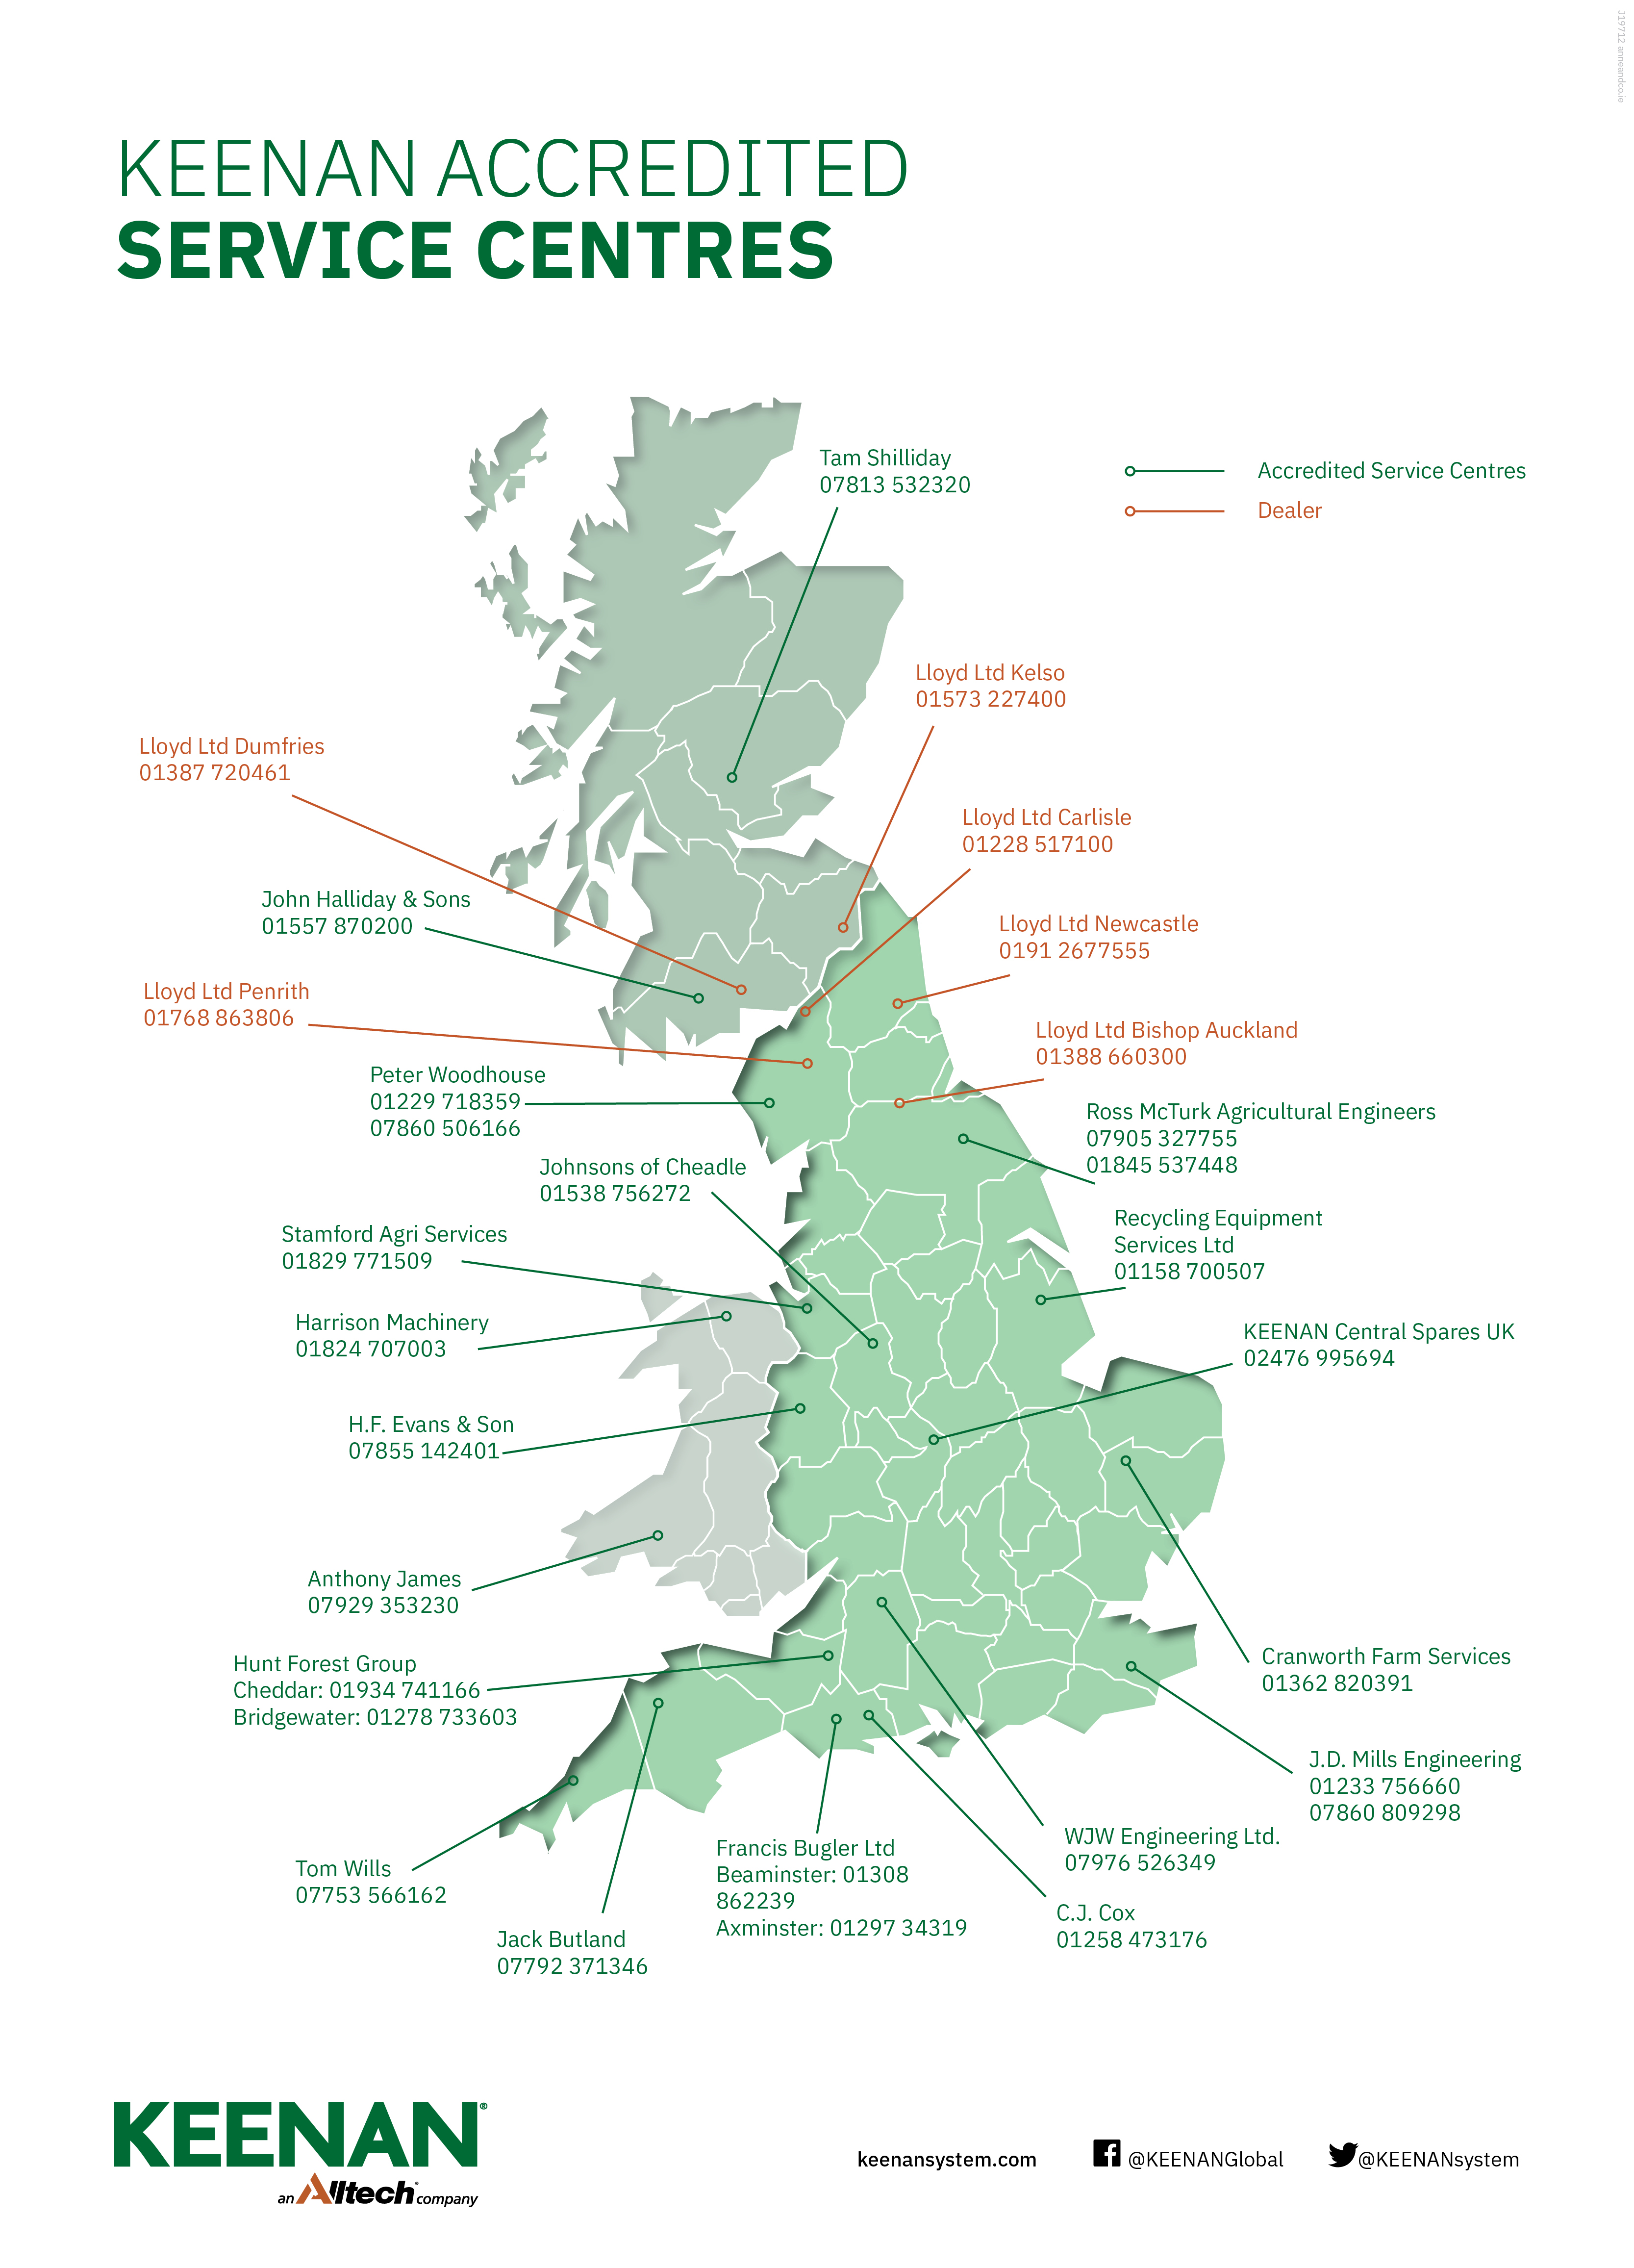 Map of UK's Keenan Accredited Service centres and Dealers, details below